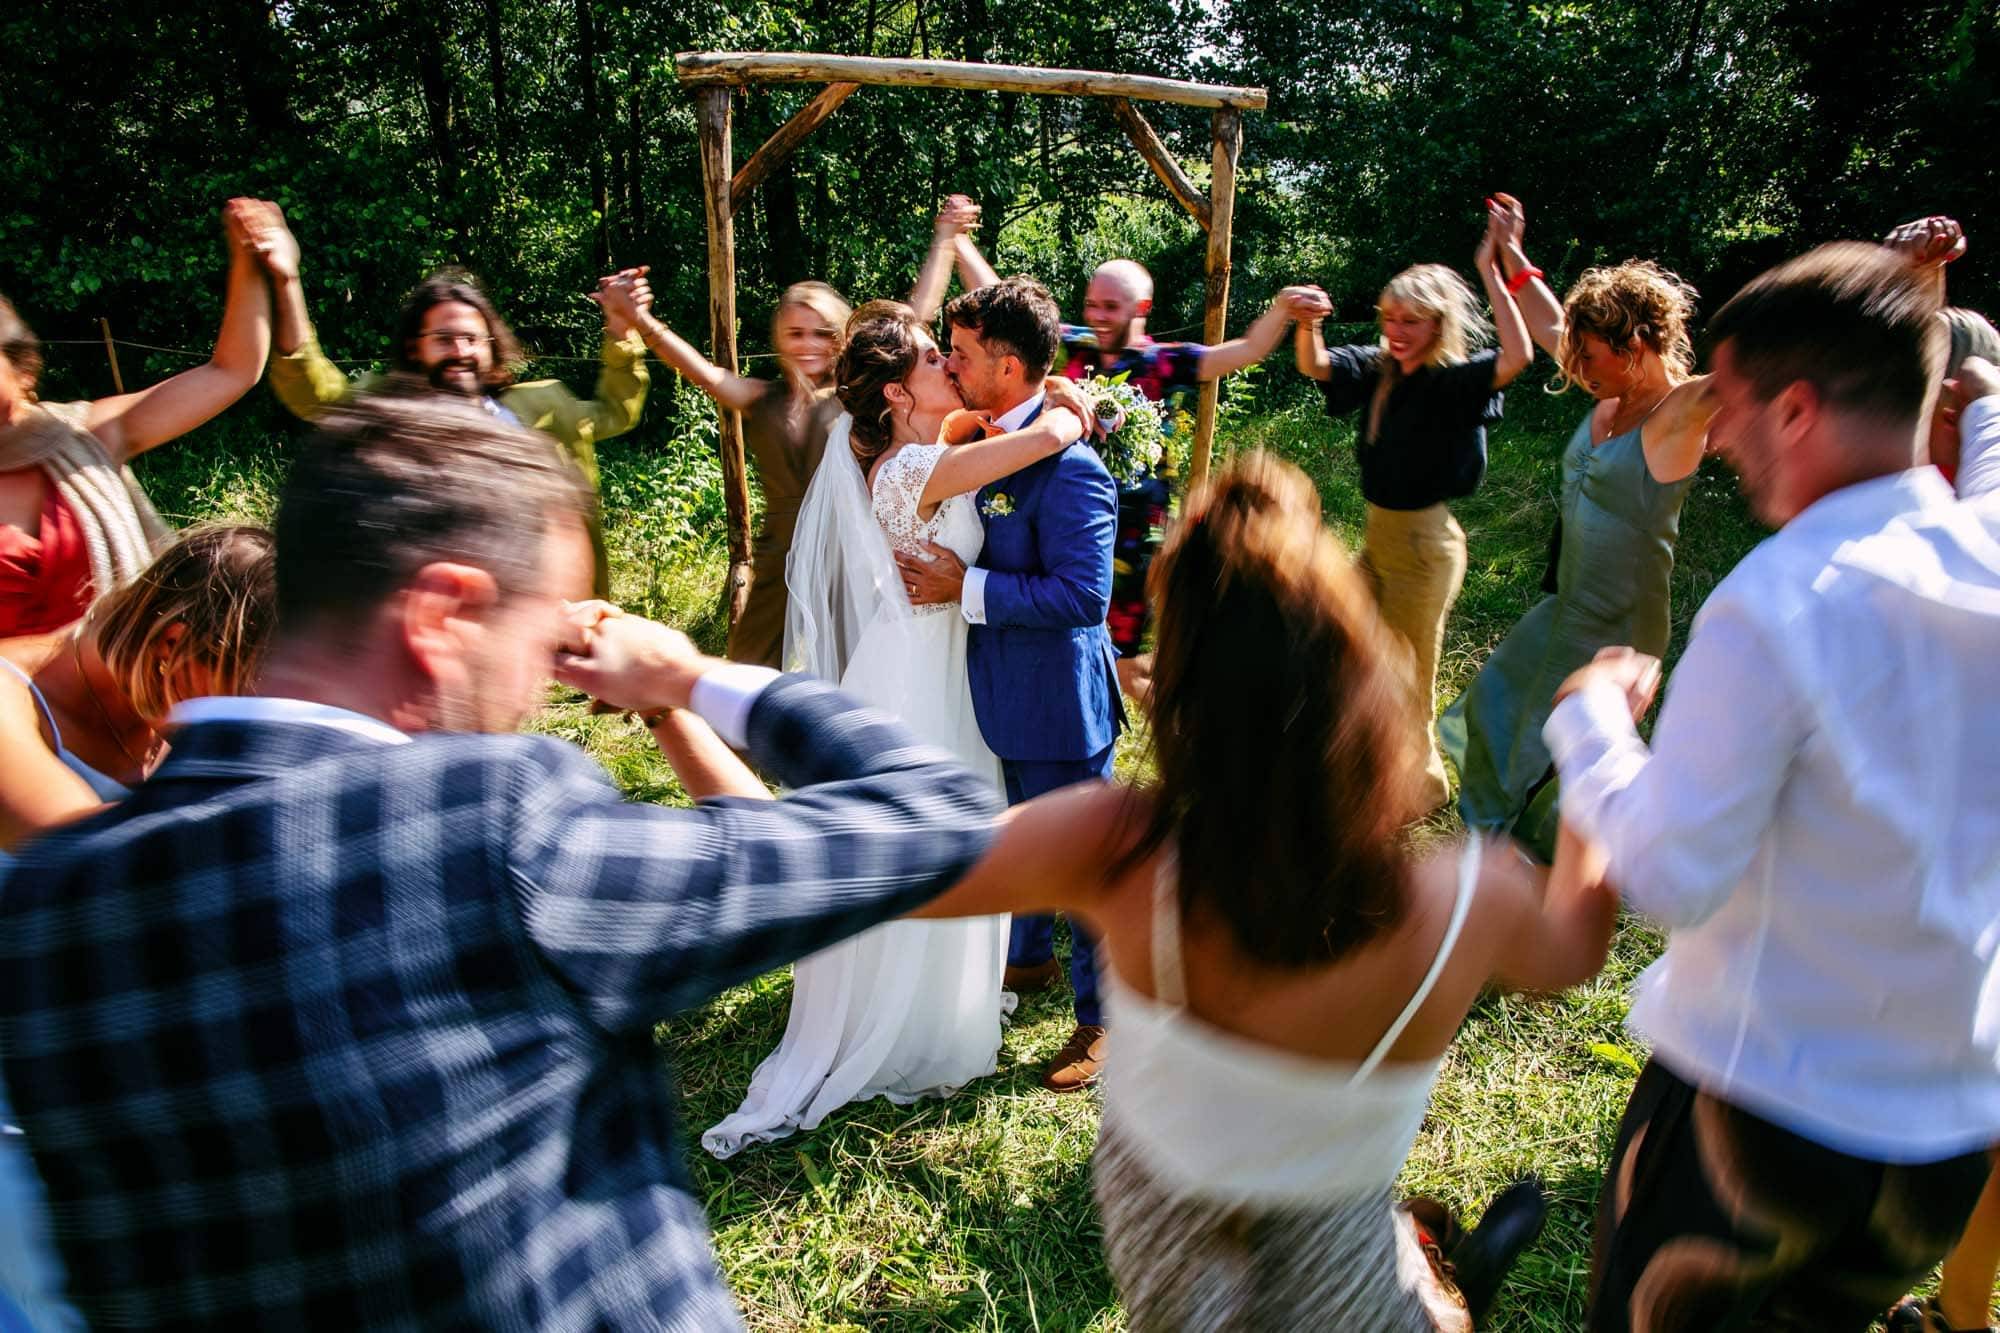 Bridal couple with guests dancing around them. Wedding photographer Justin Manders